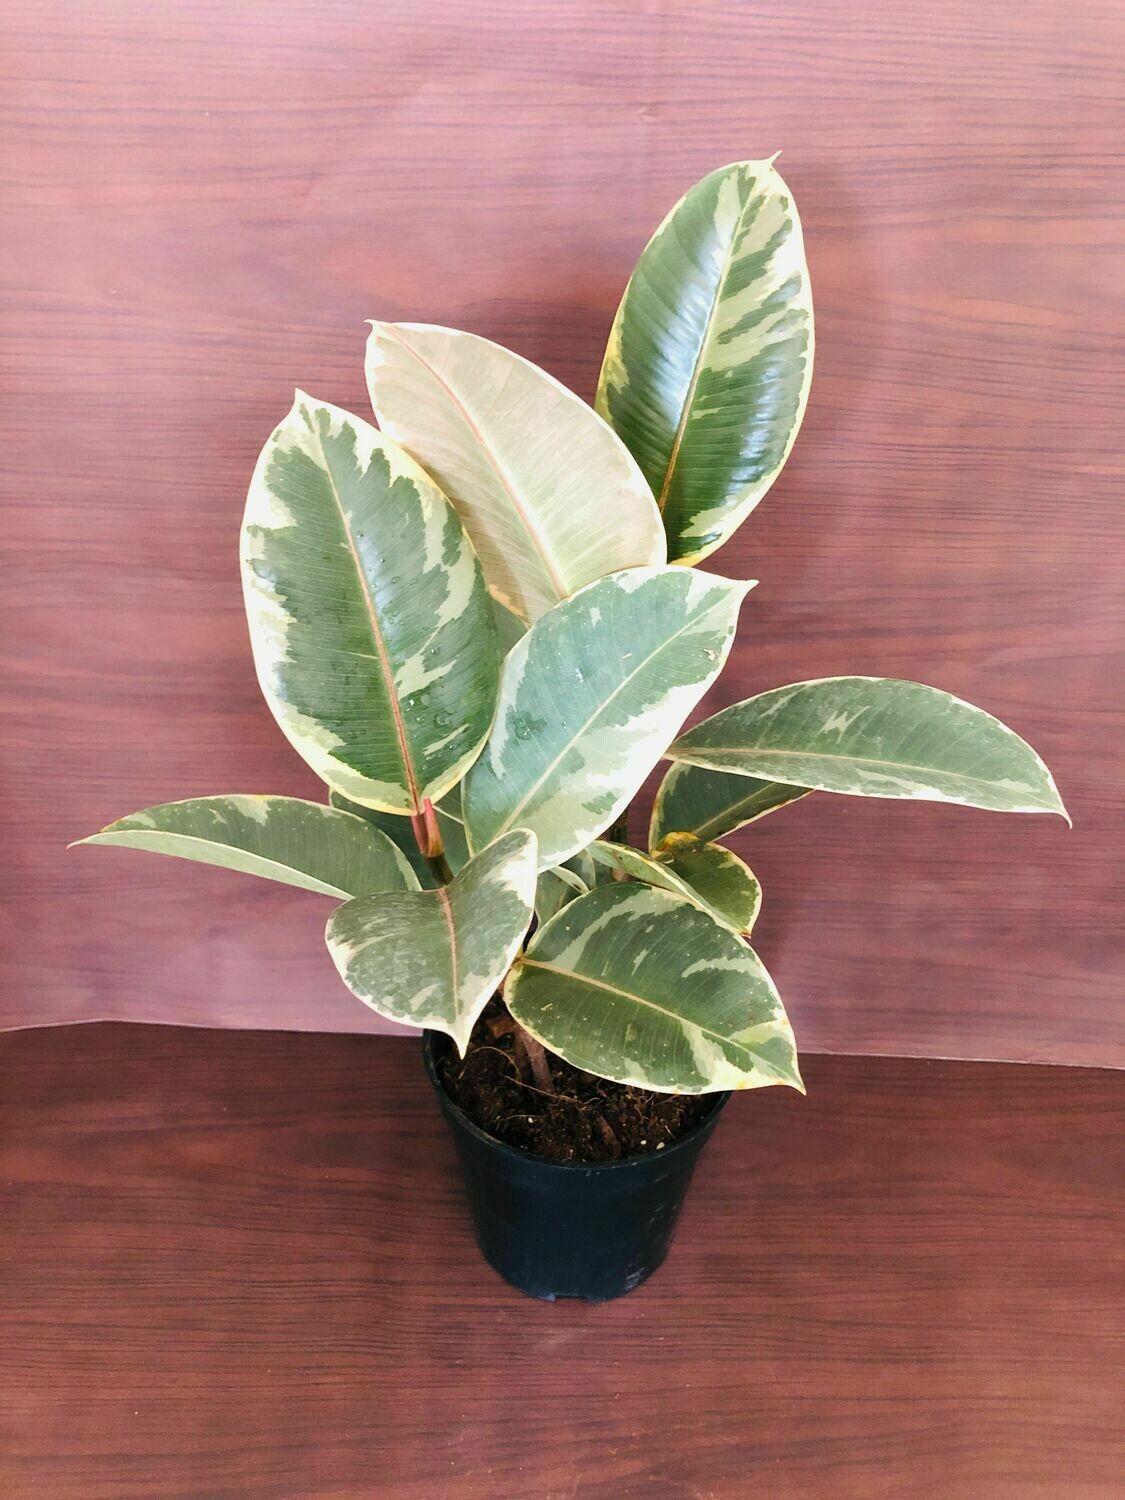 Ficus Elastica - Rubber Plant Variegated in 4 inches Nursery Pot